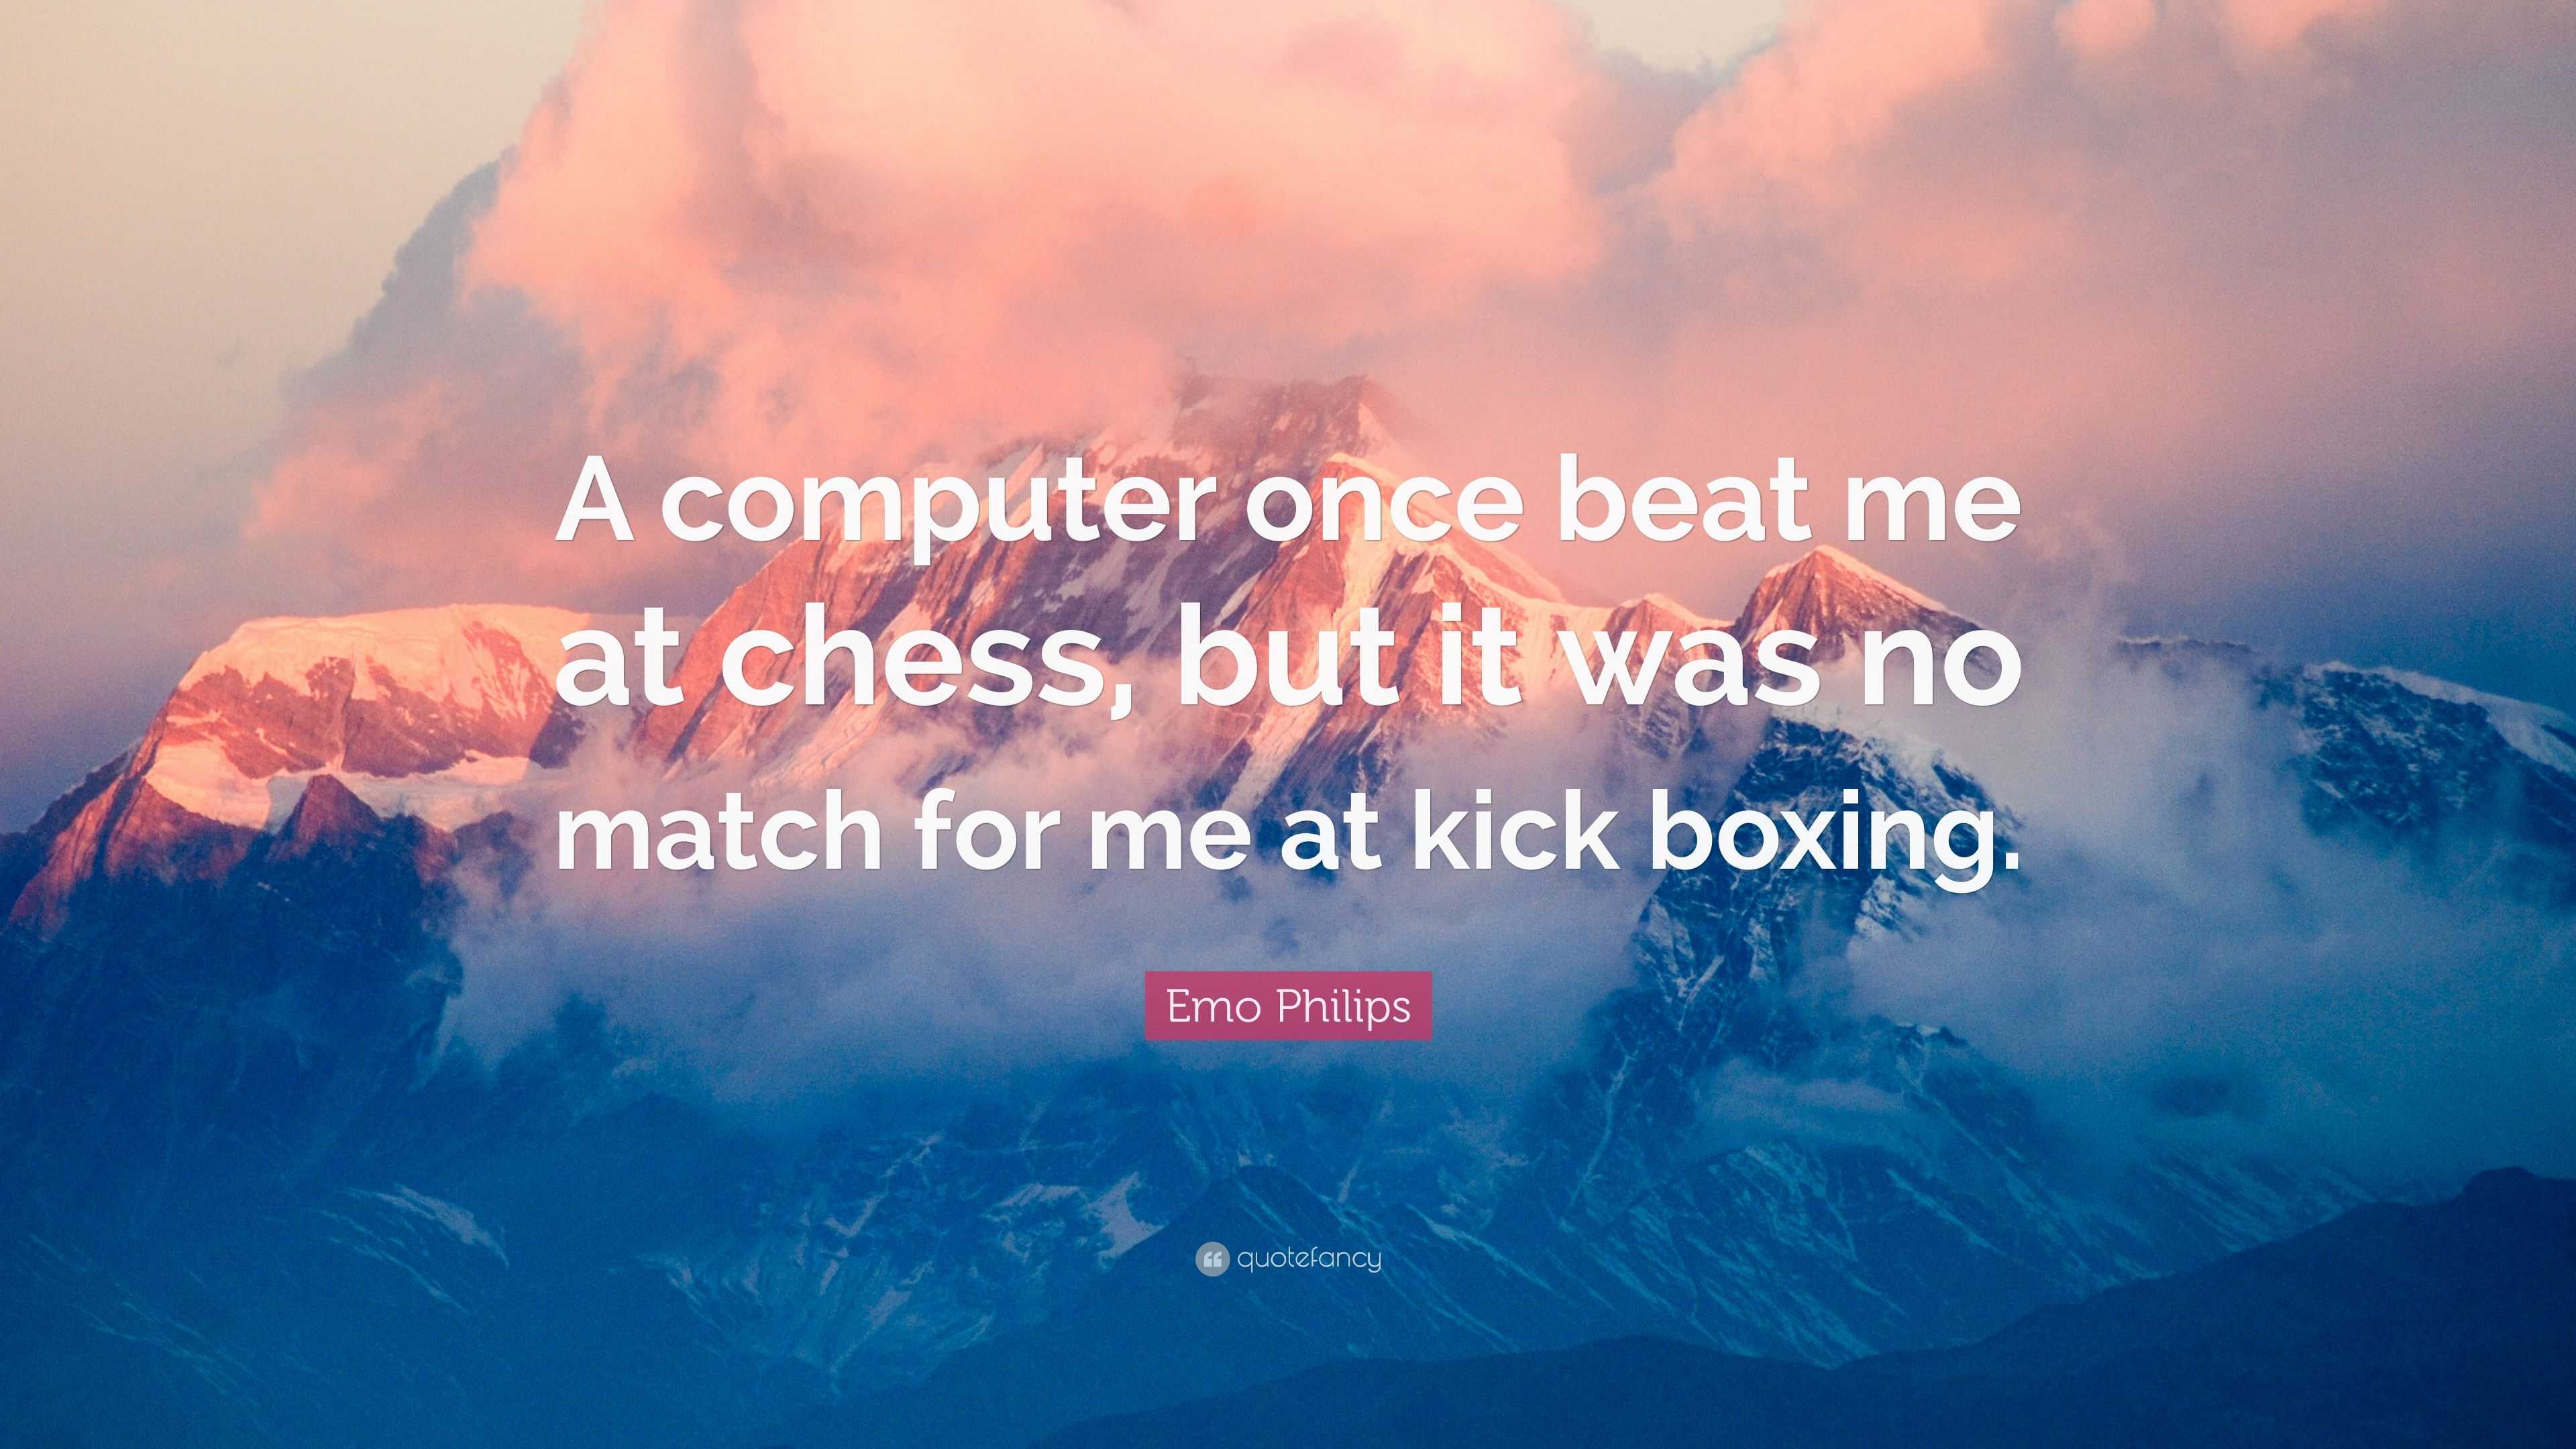 Send you a video of me playing chess against myself by Attackthewookie